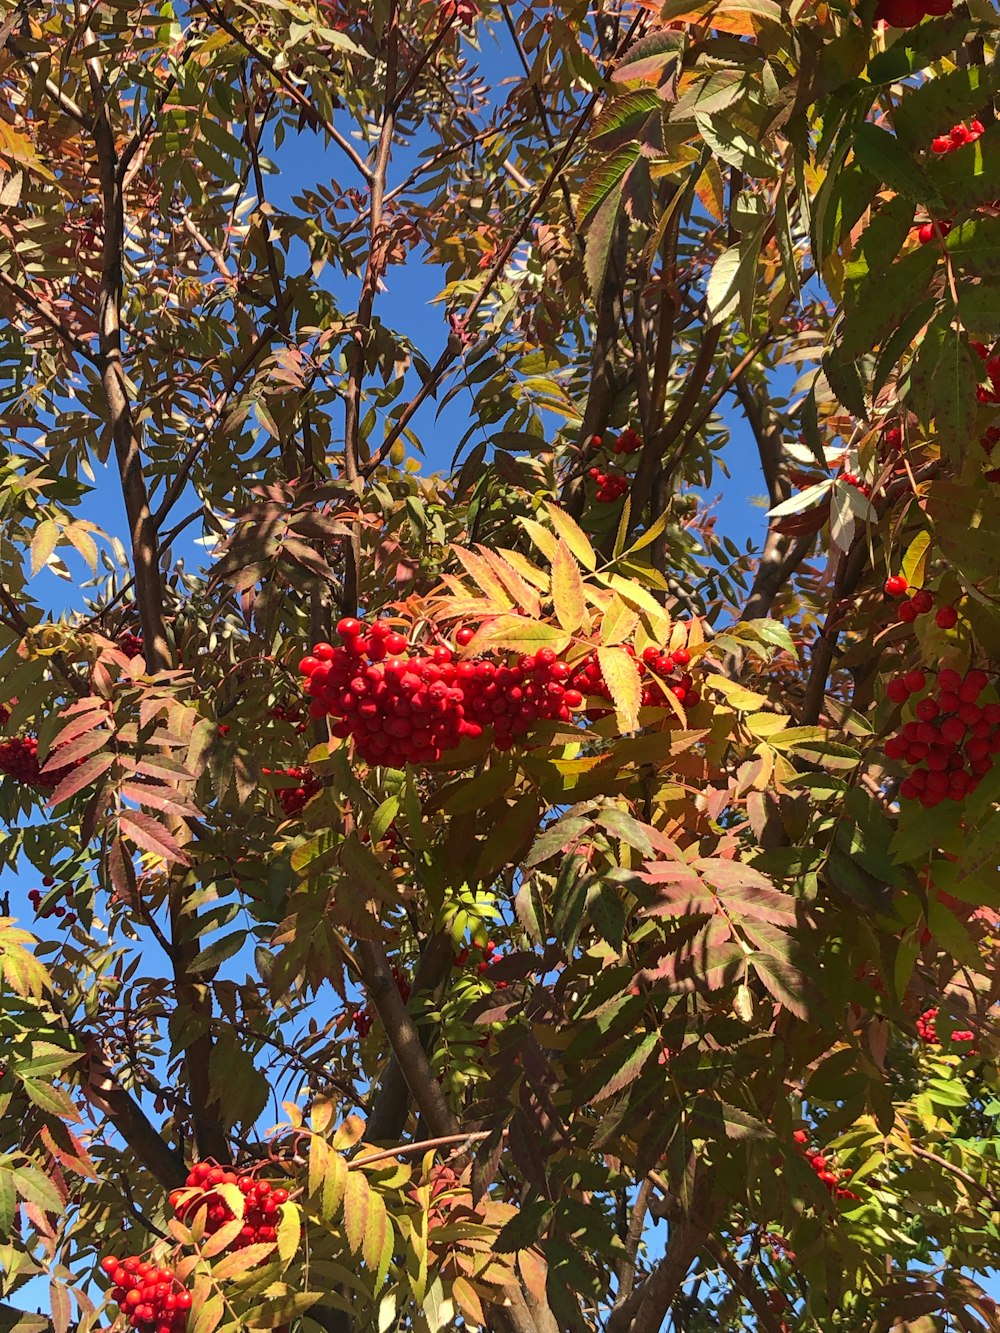 a tree filled with lots of red berries under a blue sky